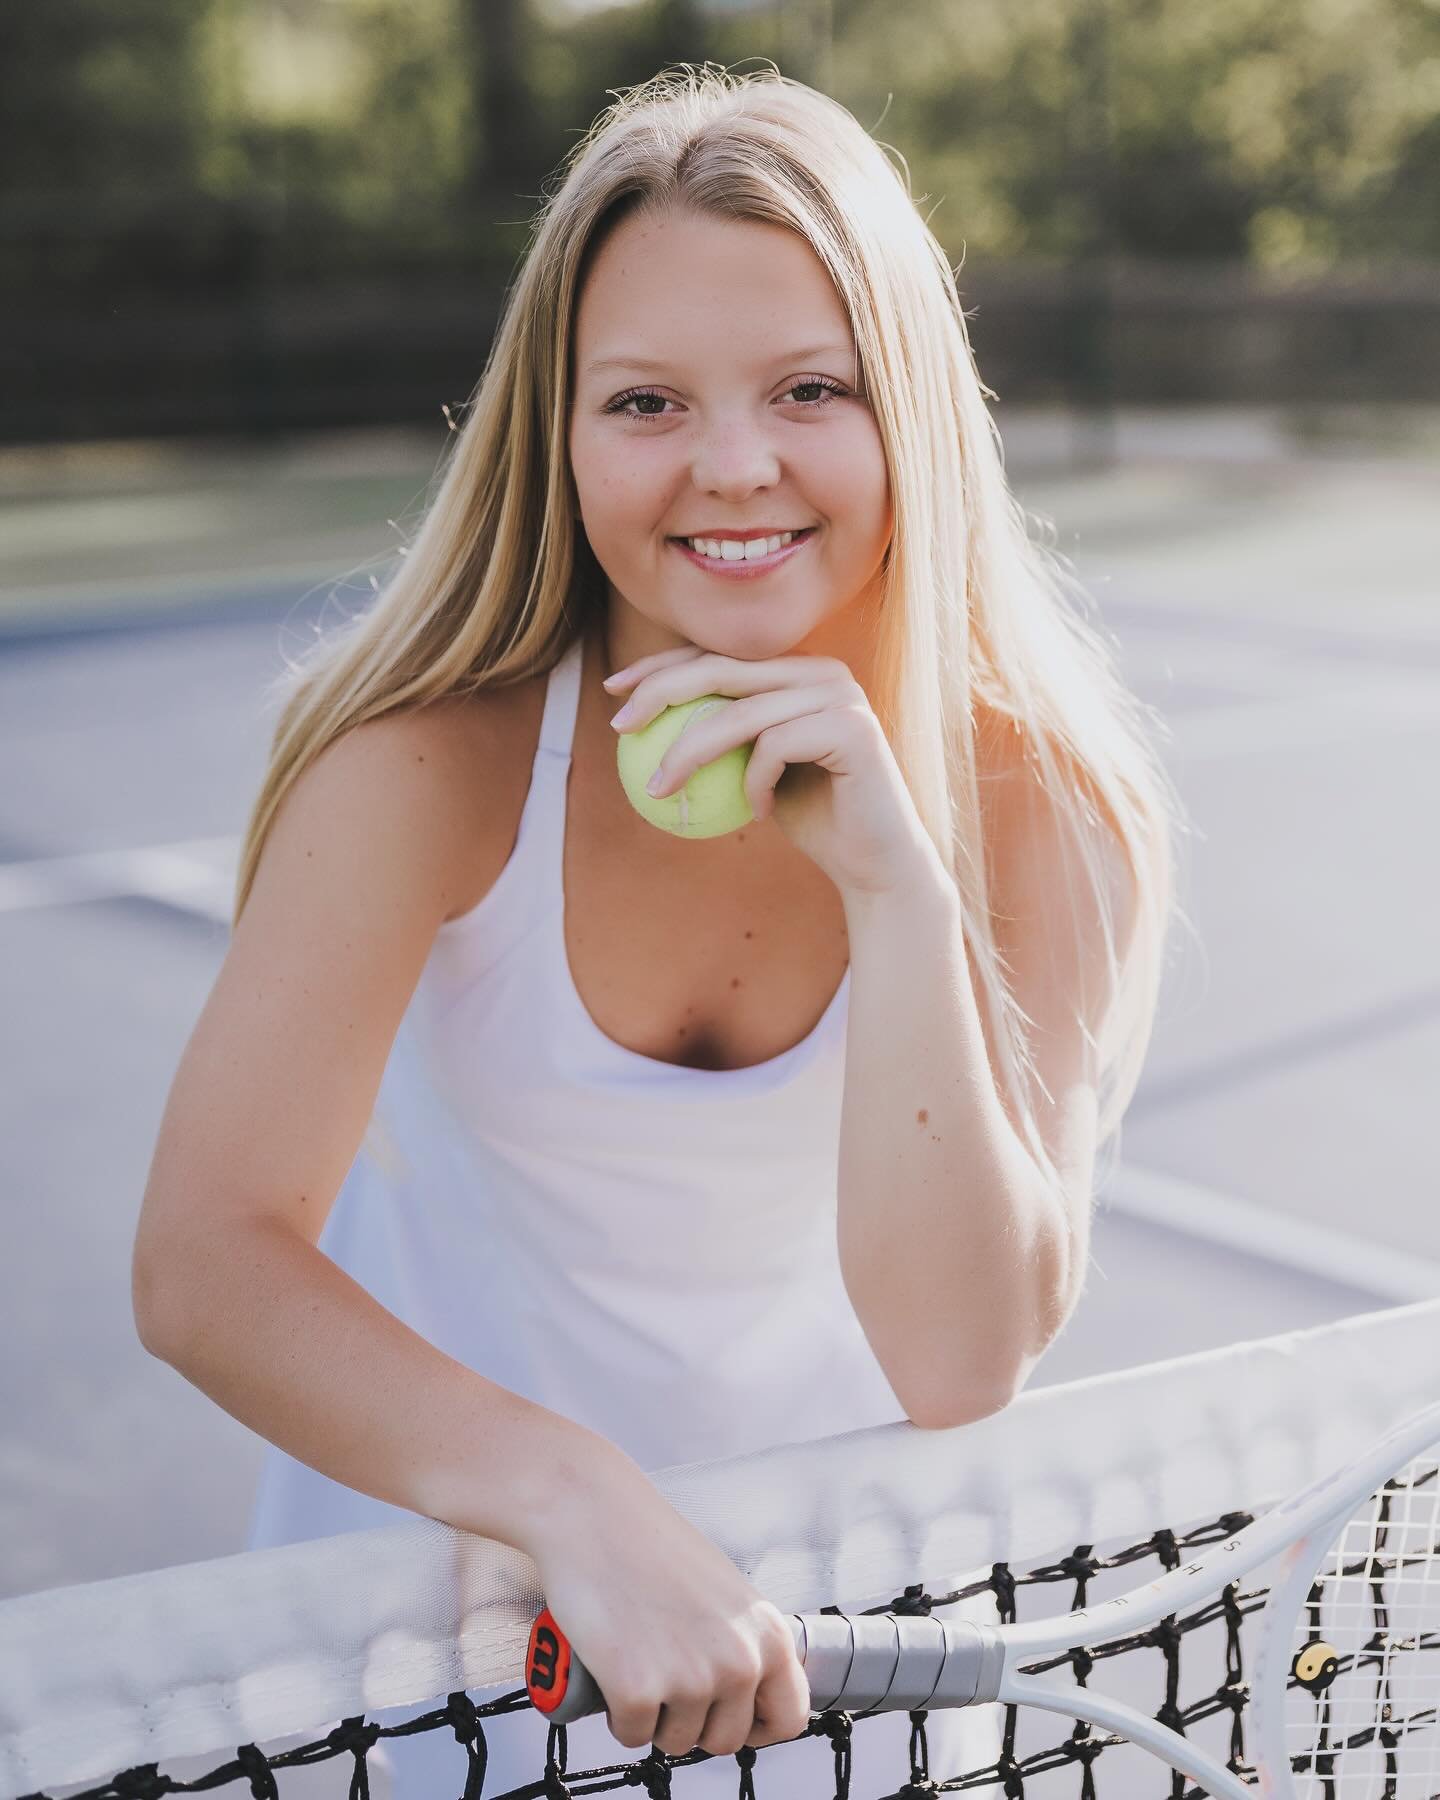 All the senior things are coming to an end very soon. But Kylee is continuing her tennis career at Berry College in Georgia. I loved hanging out with her this morning capturing these final memories! Best Wishes Kylee!